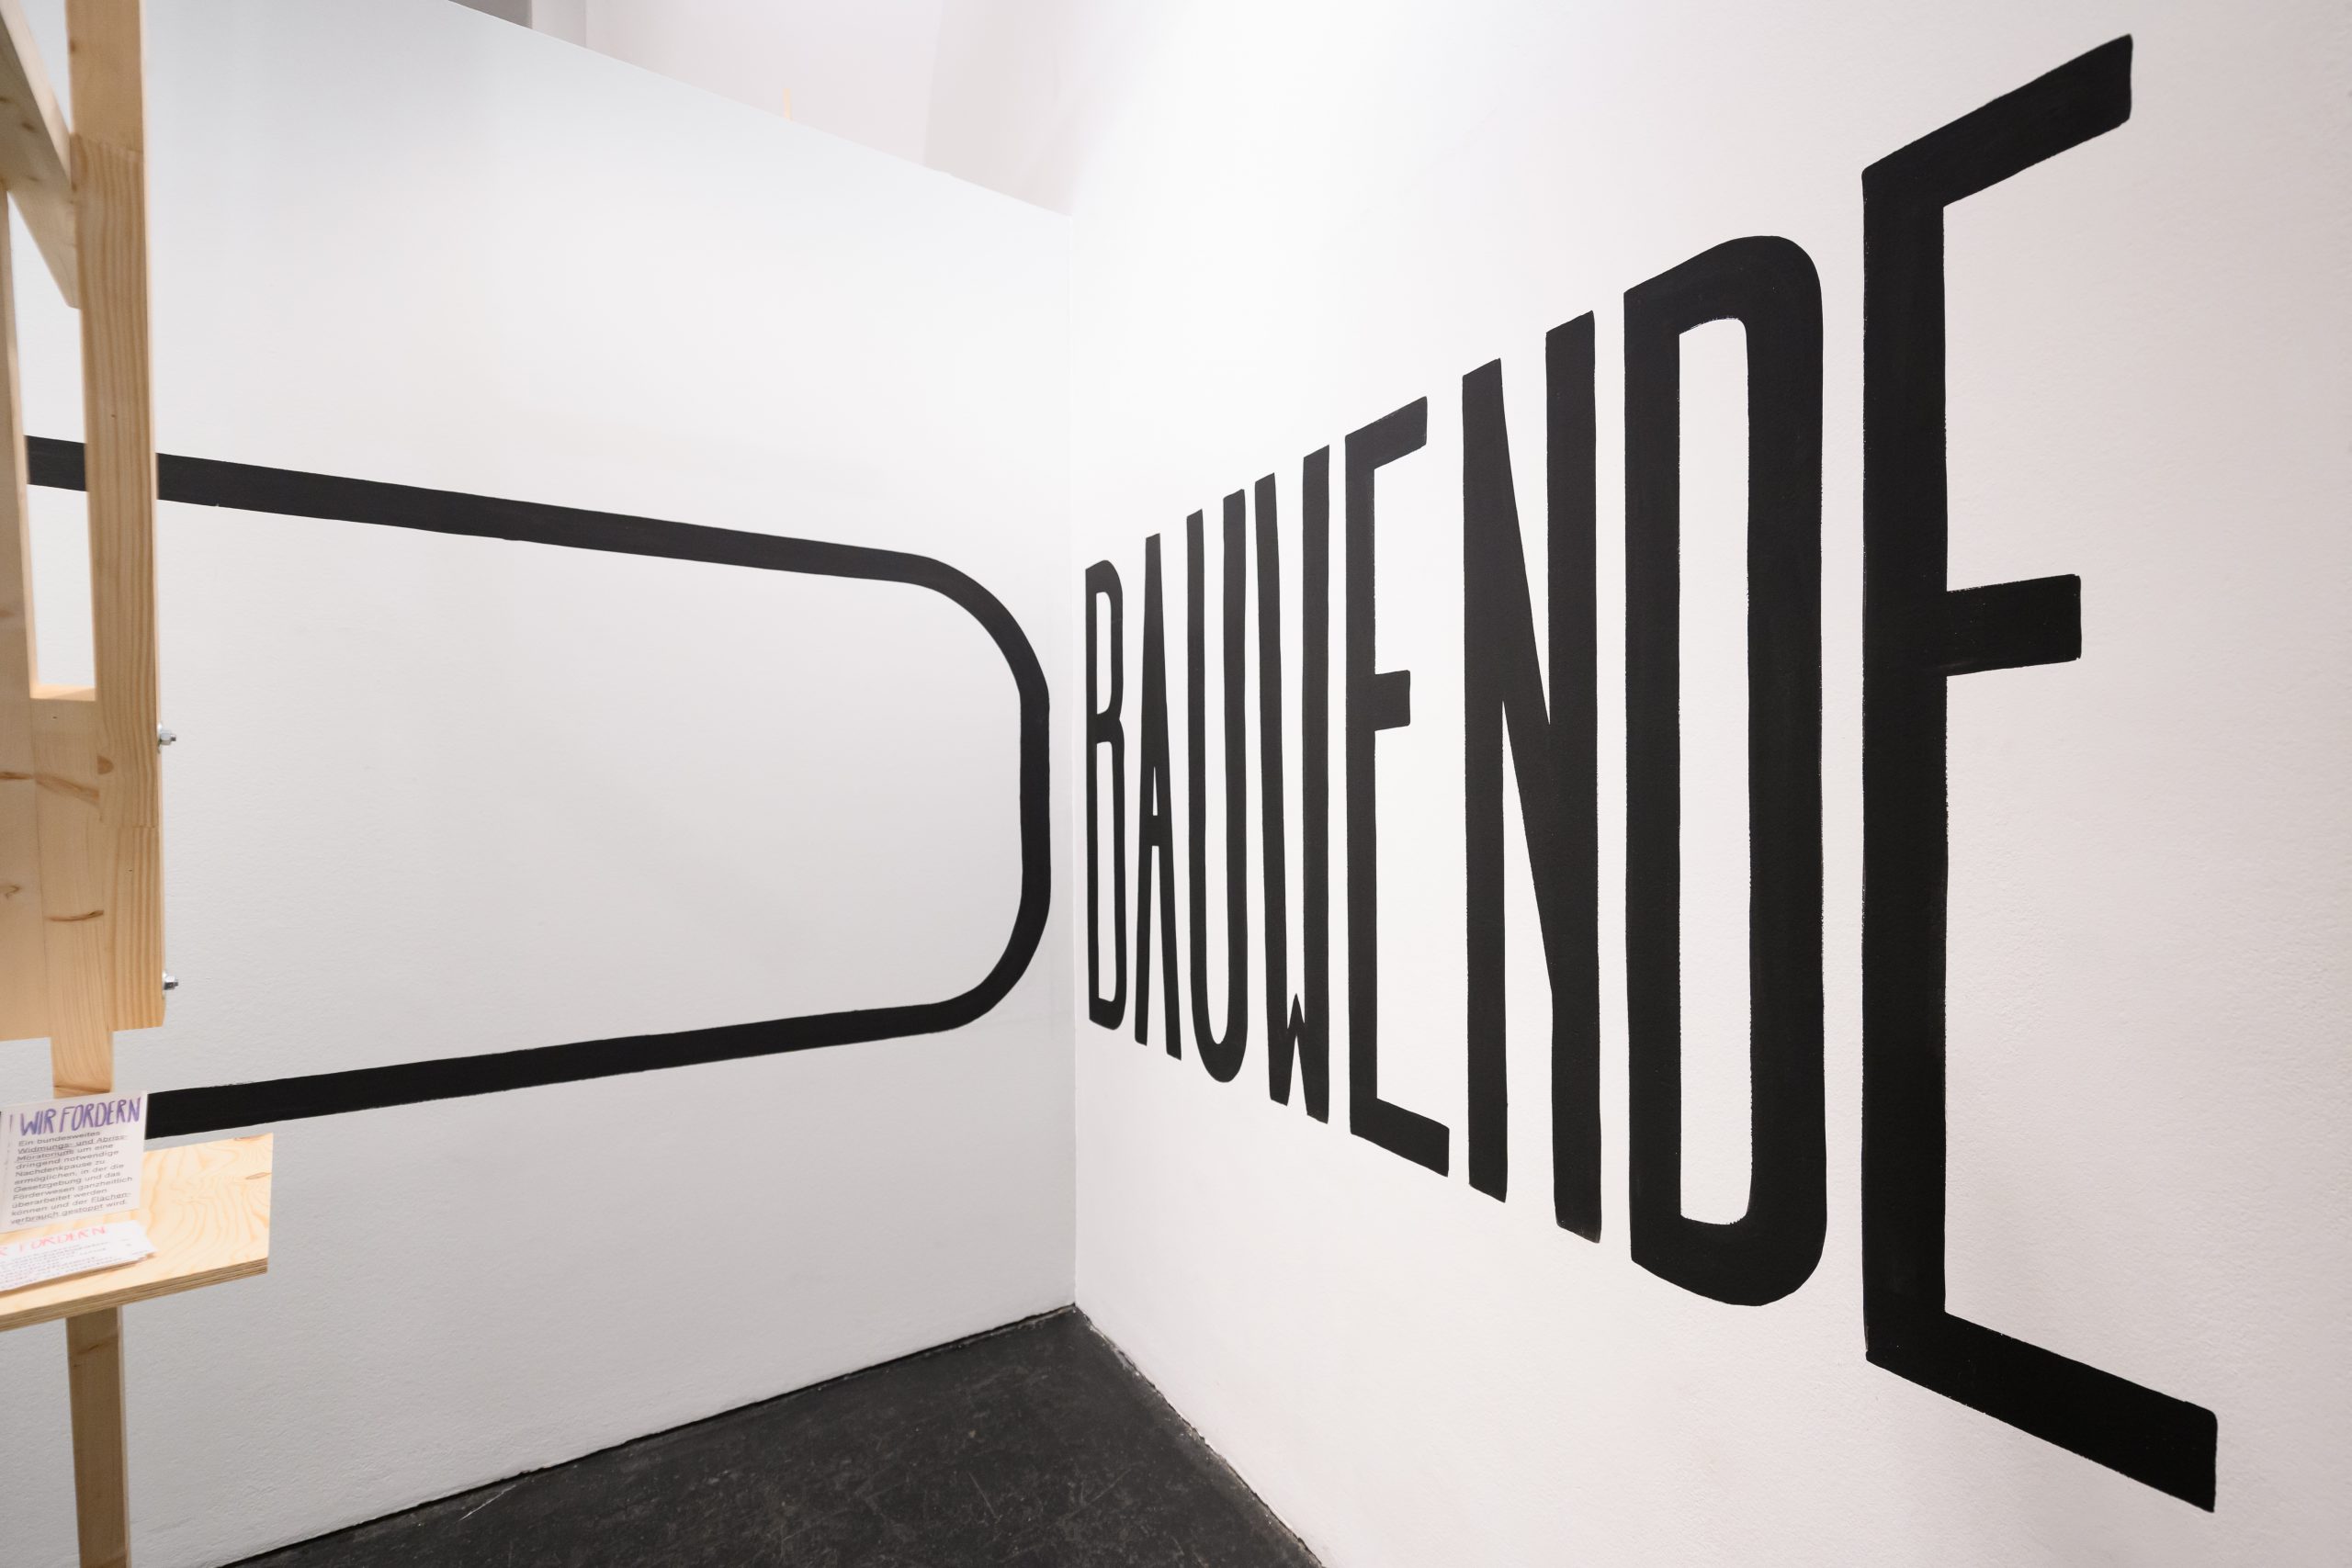 the word Bauwende is written in large black letters on a white wall